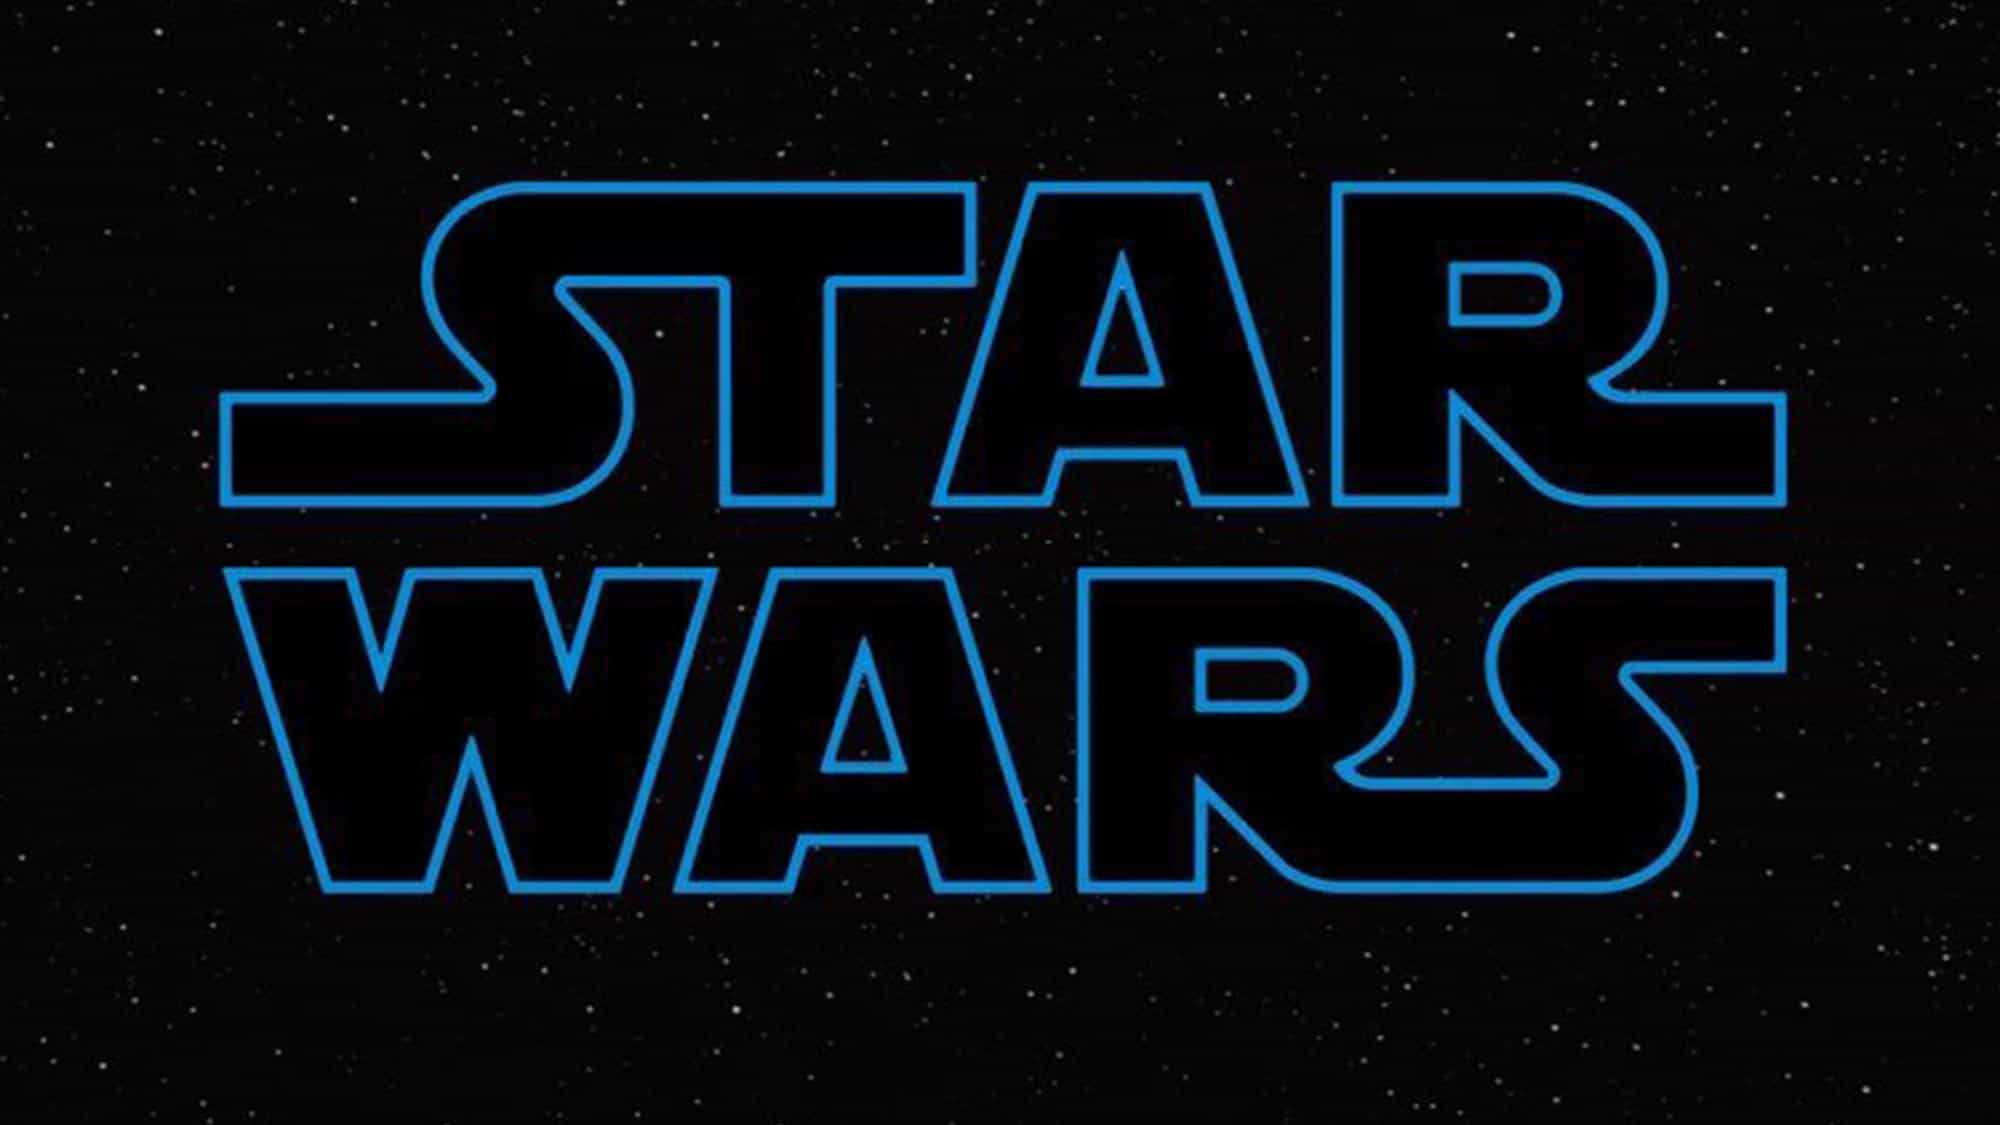 Godzilla director Gareth Edwards will direct a Star Wars spin off movie with a screenplay by Garry Whitta